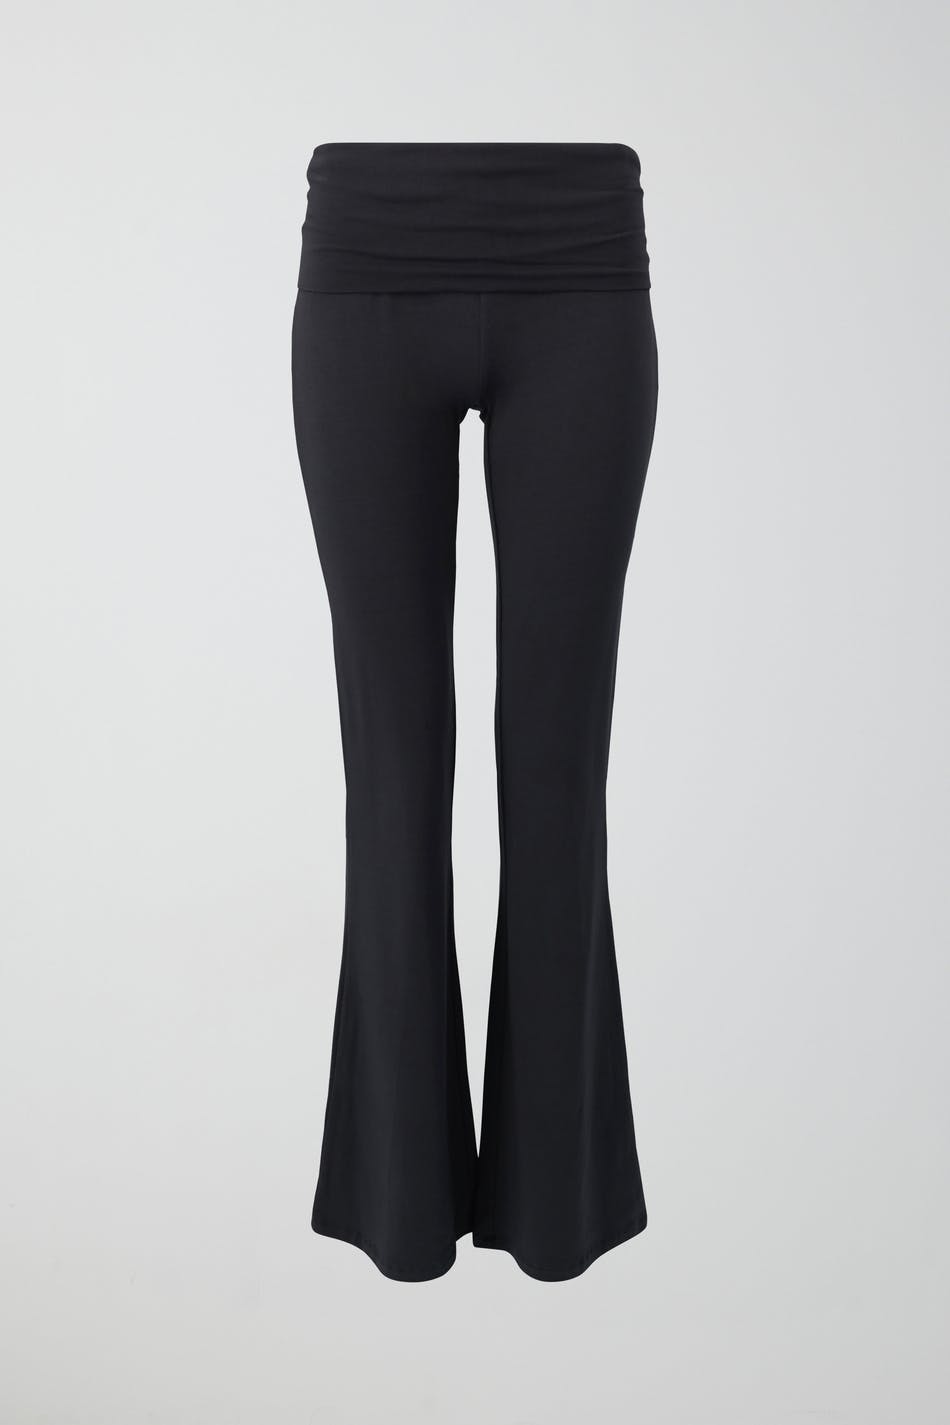 Gina Tricot - Soft touch tall folded flare trousers - yoga-pants - Black - L - Female